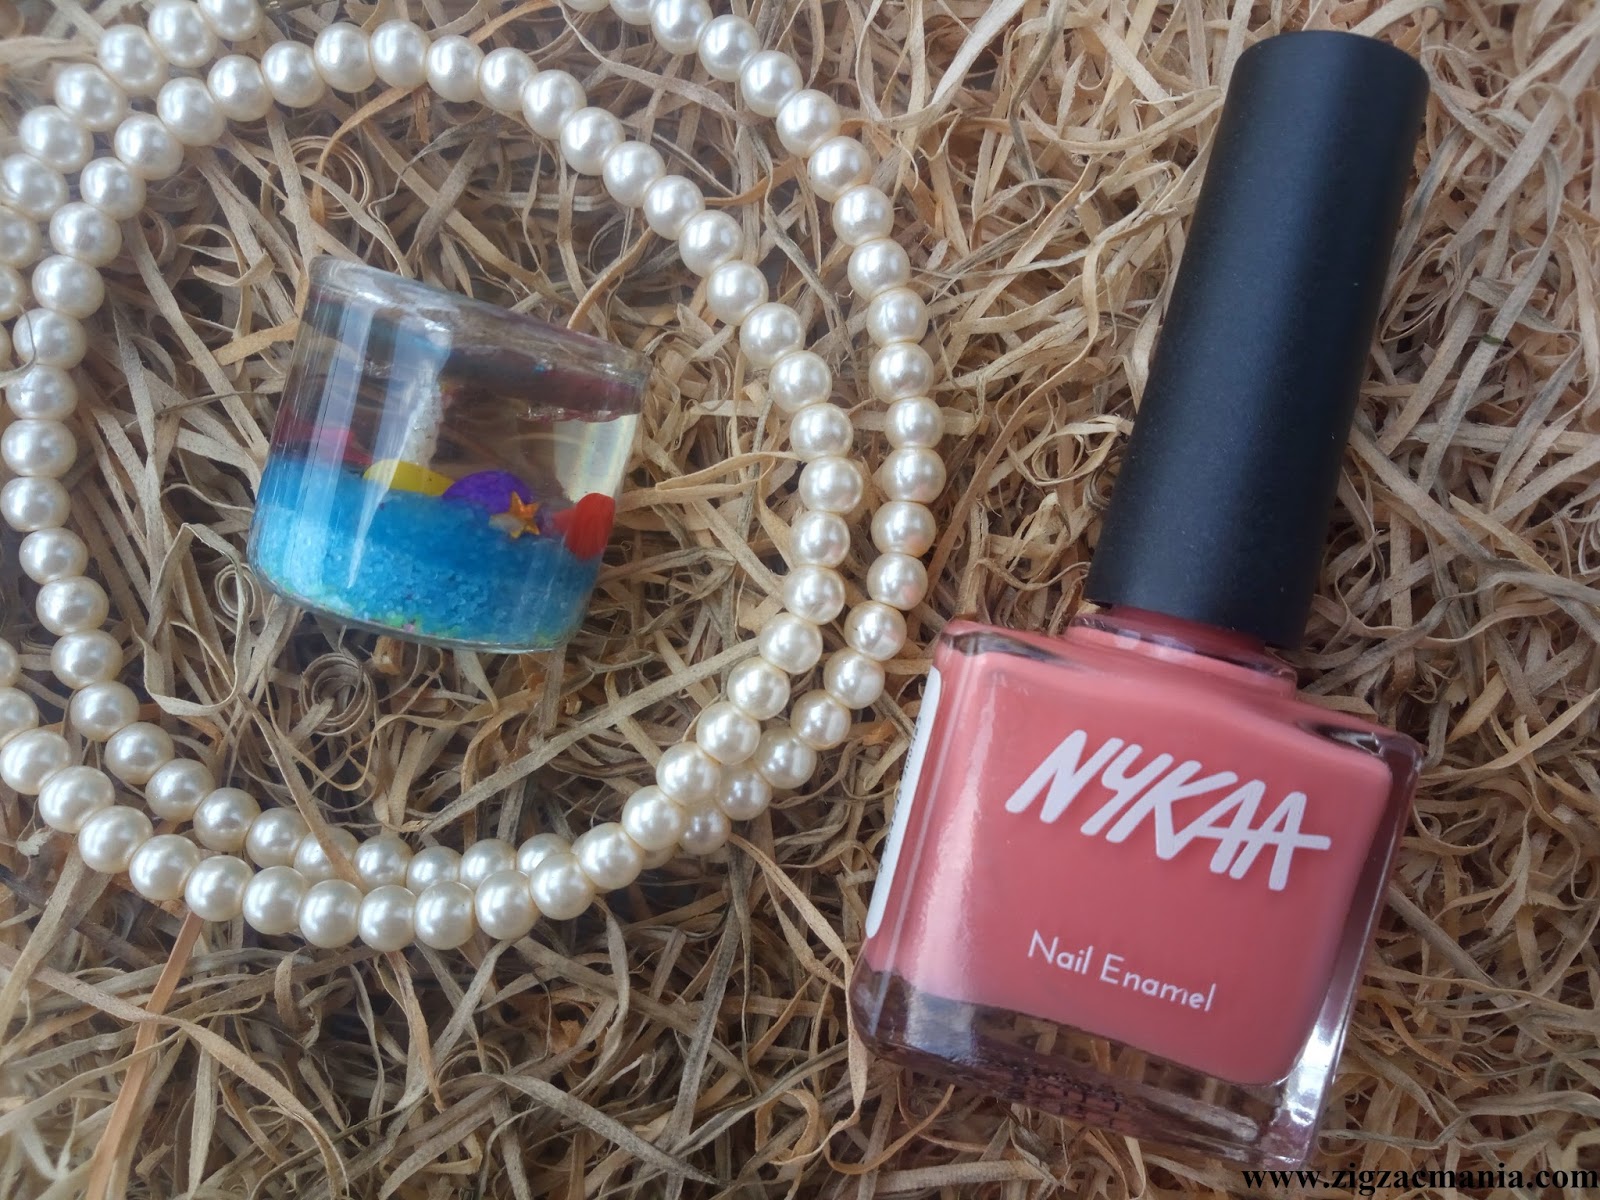 Nykaa Unicorn Potion Nail Enamels: Review and Swatches of all 5 colors